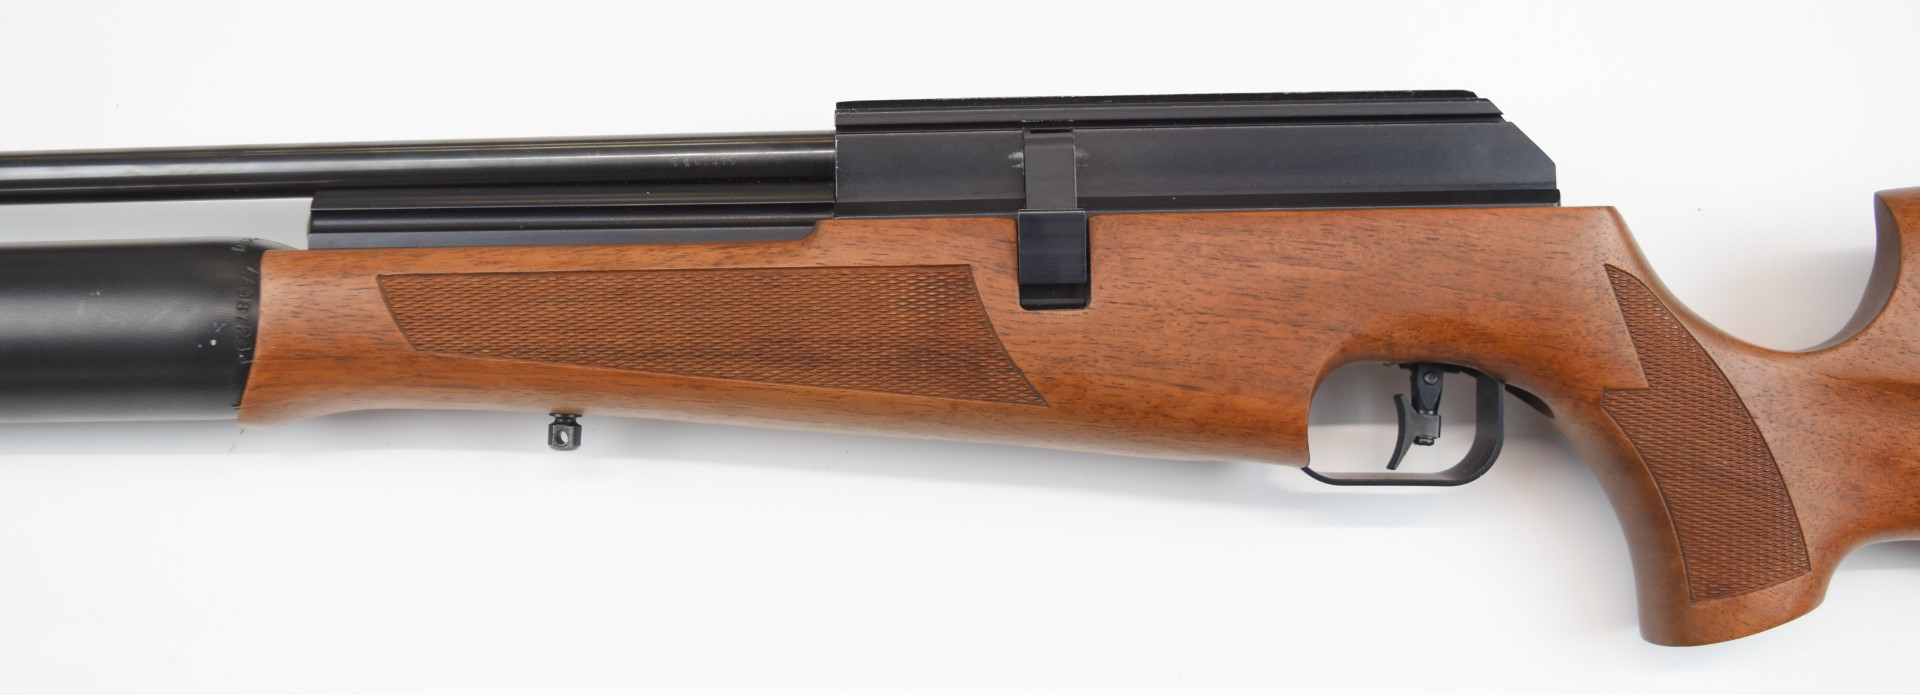 BSA .177 PCP air rifle with chequered semi-pistol grip and forend, sling mounts, adjustable - Image 14 of 19